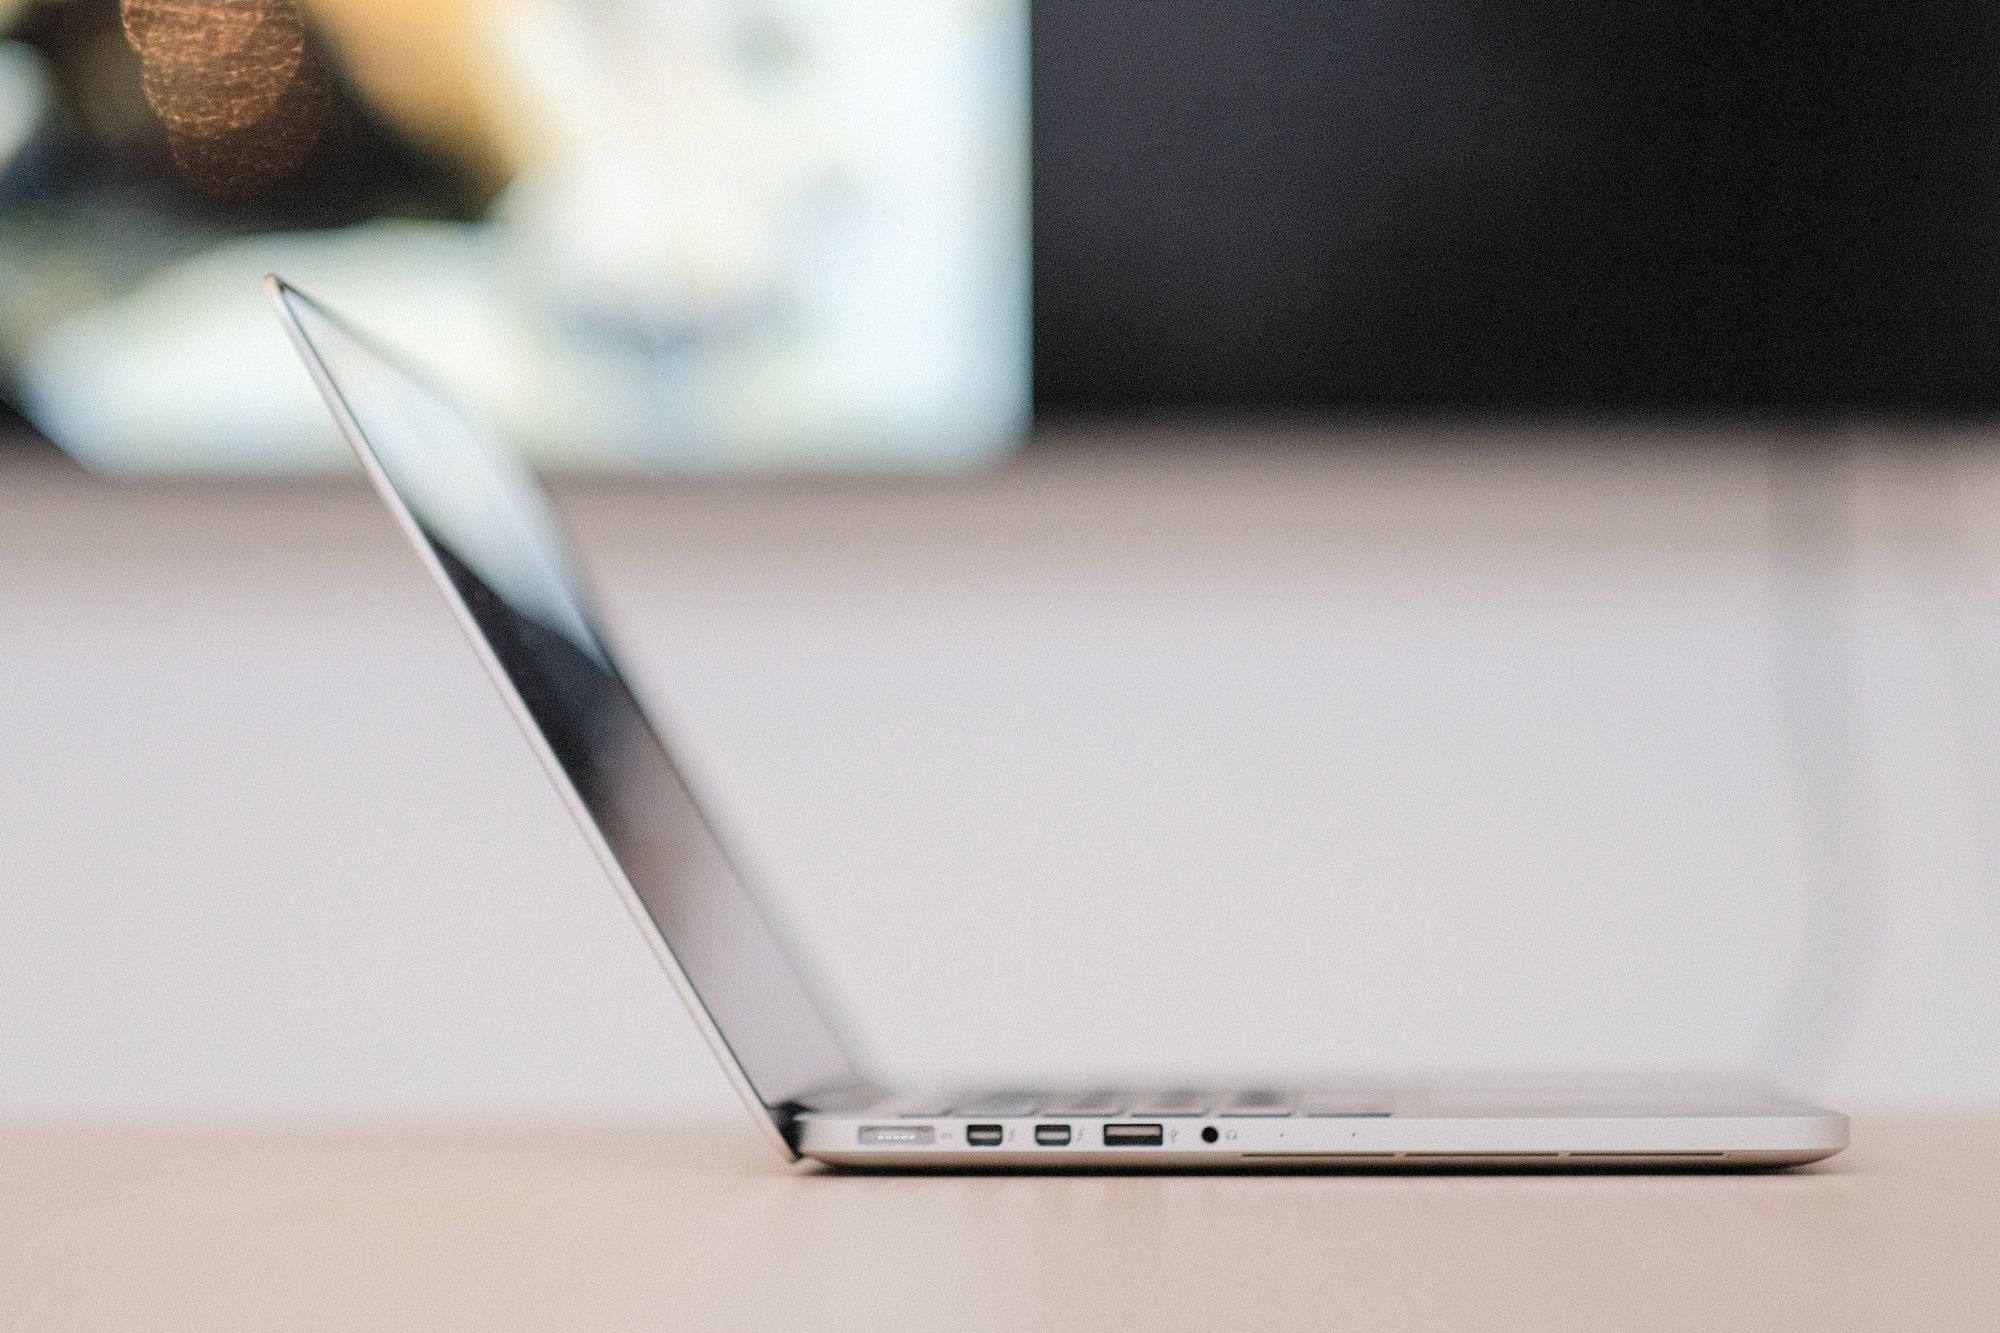 Why PRO-MacbookPro Users Don’t Mind A Thicker Laptop—Perspectives